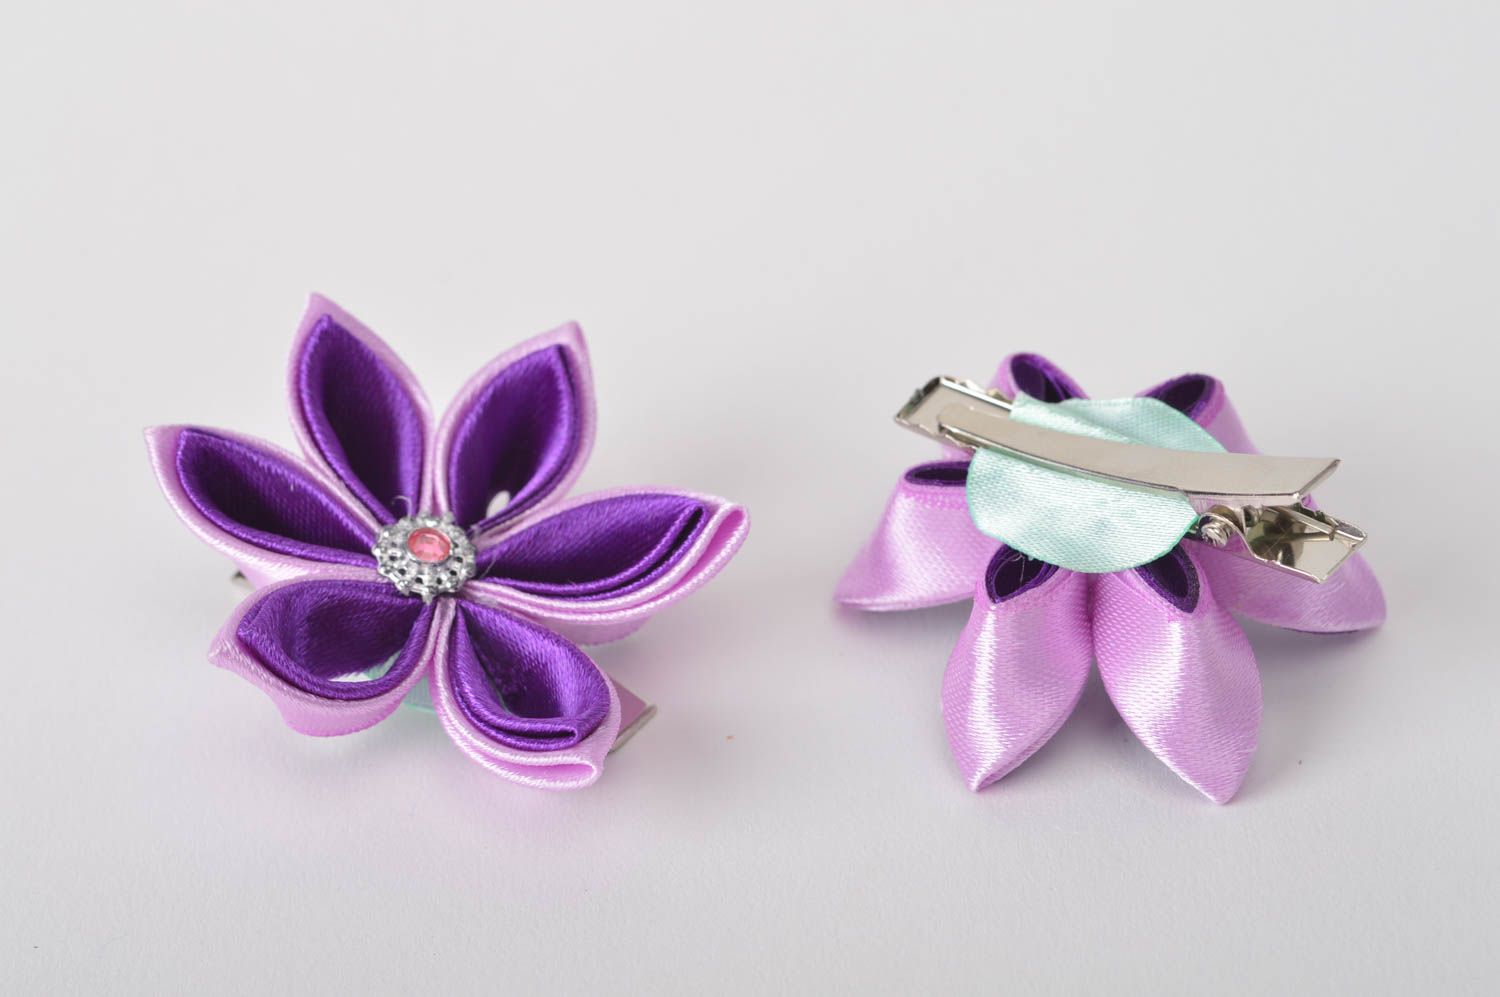 Handmade hair clips for kids stylish kanzashi hair clips 2 pieces violets photo 2